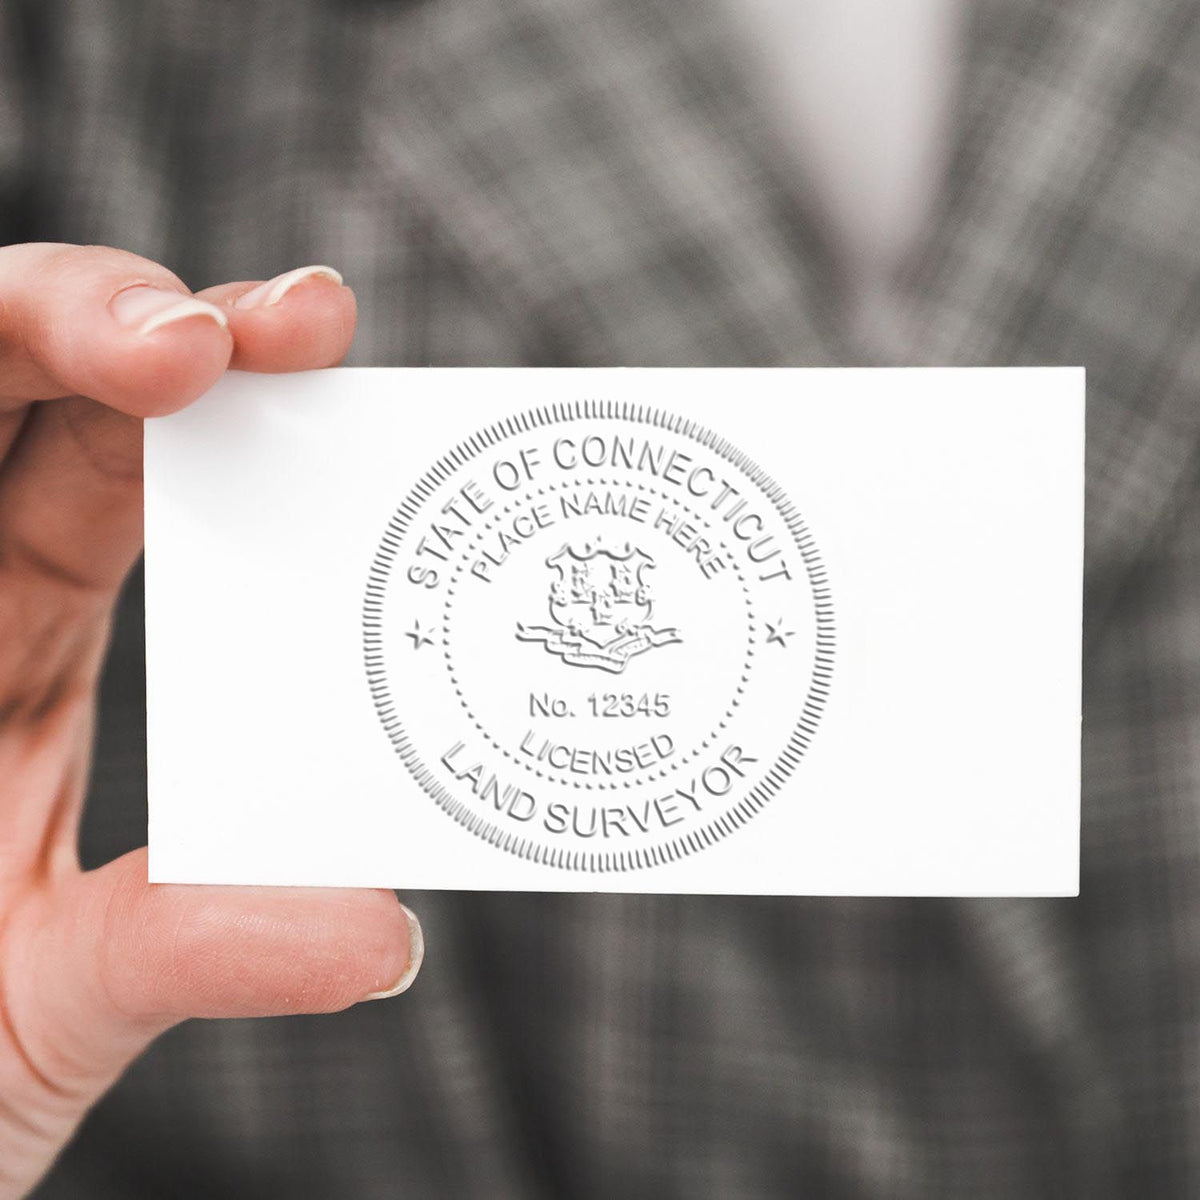 An in use photo of the Gift Connecticut Land Surveyor Seal showing a sample imprint on a cardstock